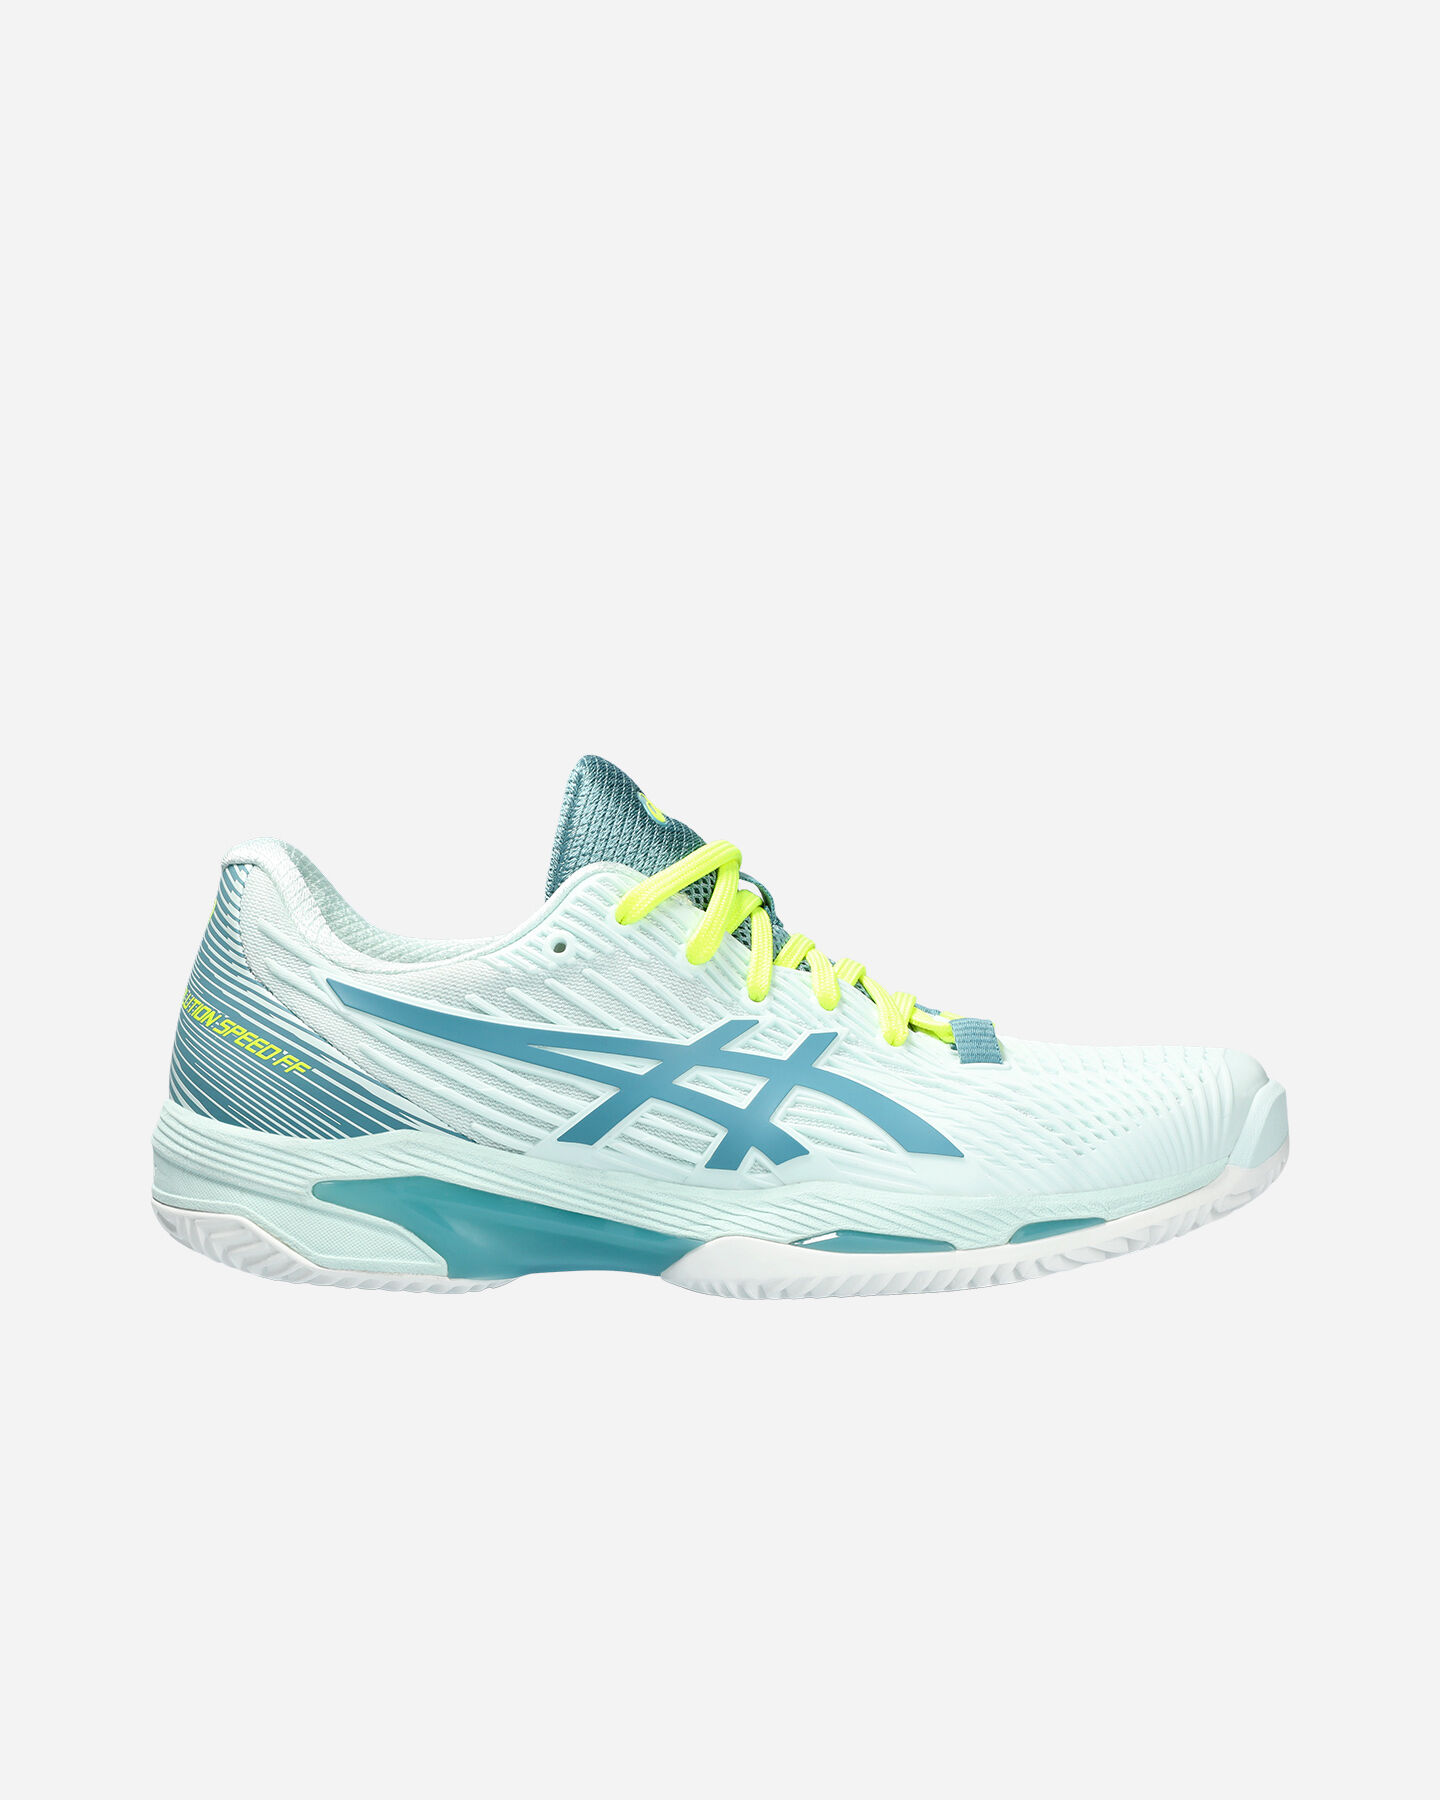  Scarpe tennis ASICS SOLUTION SPEED FF 2 CLAY W S5585315|405|6H scatto 0